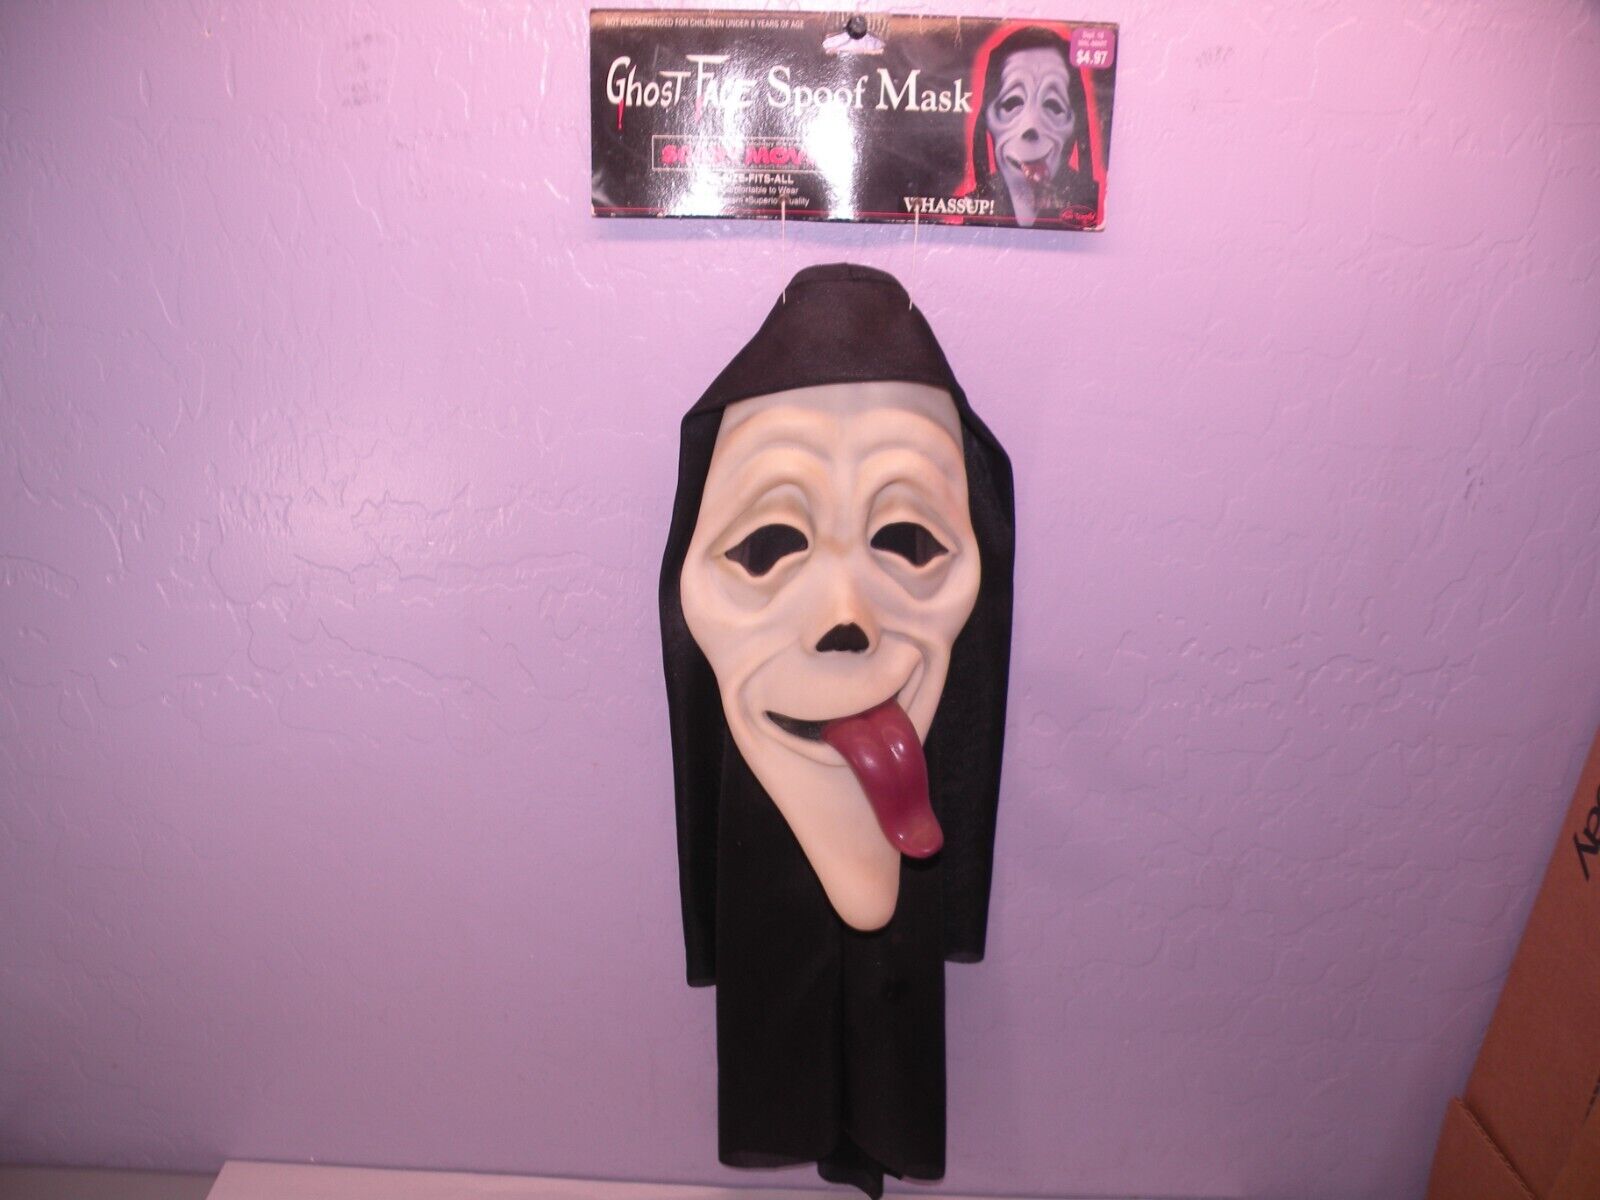 2000 Vintage Fun World SCARY MOVIE Spoof Mask Ghost Face SCREAM Tongue Out